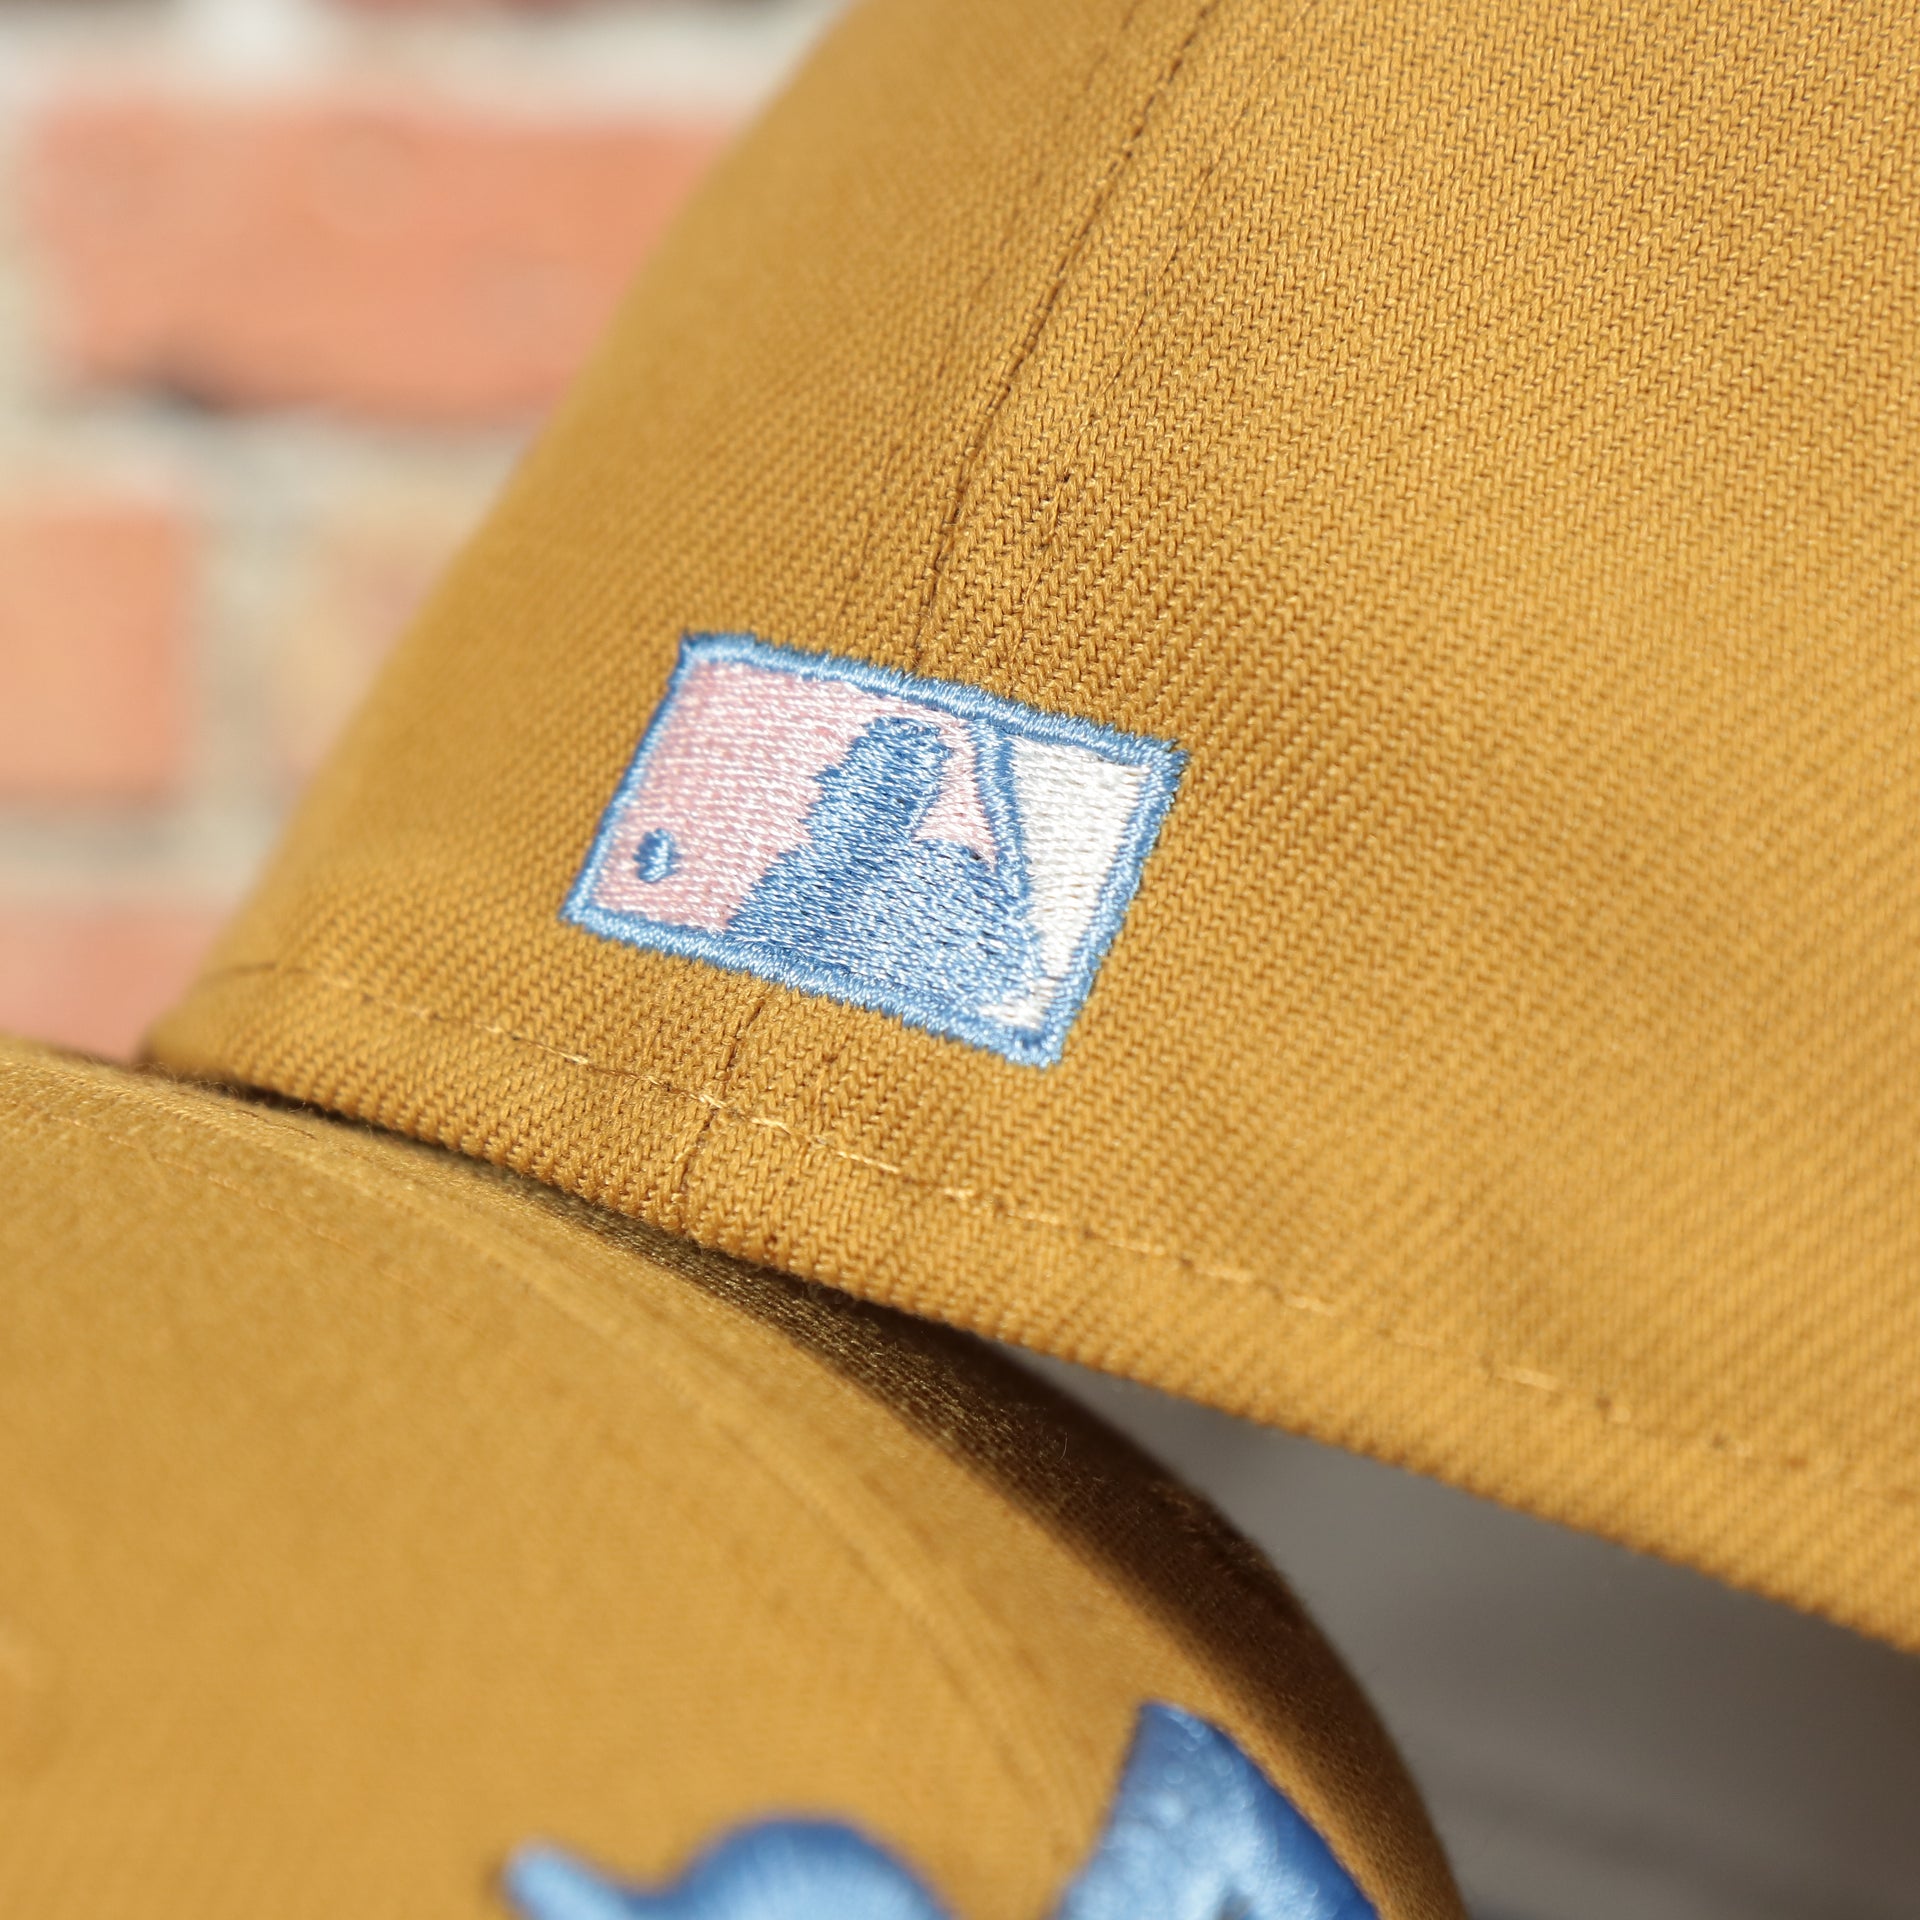 cooperstown batterman logo on the Philadelphia Phillies Cooperstown 1910 Logo 100th Anniversary Side Patch Icy Blue UV 59Fifty Fitted Cap | "English Toffee" Hoagie Pack